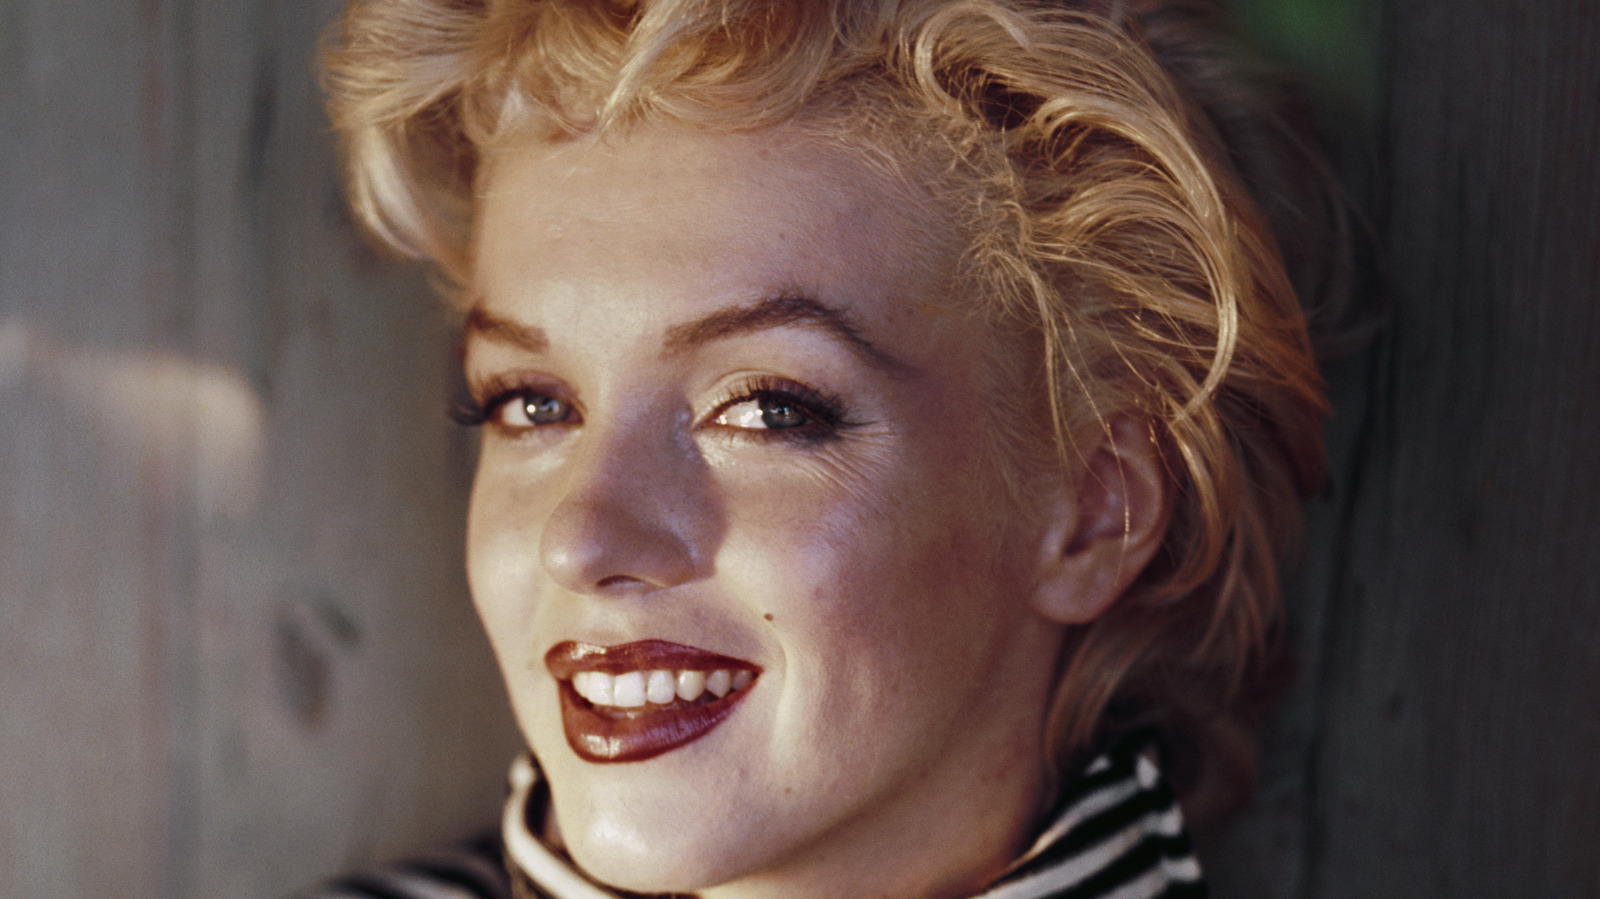 If You've Never Watched A Marilyn Monroe Movie, Here's The One You Should  Start With